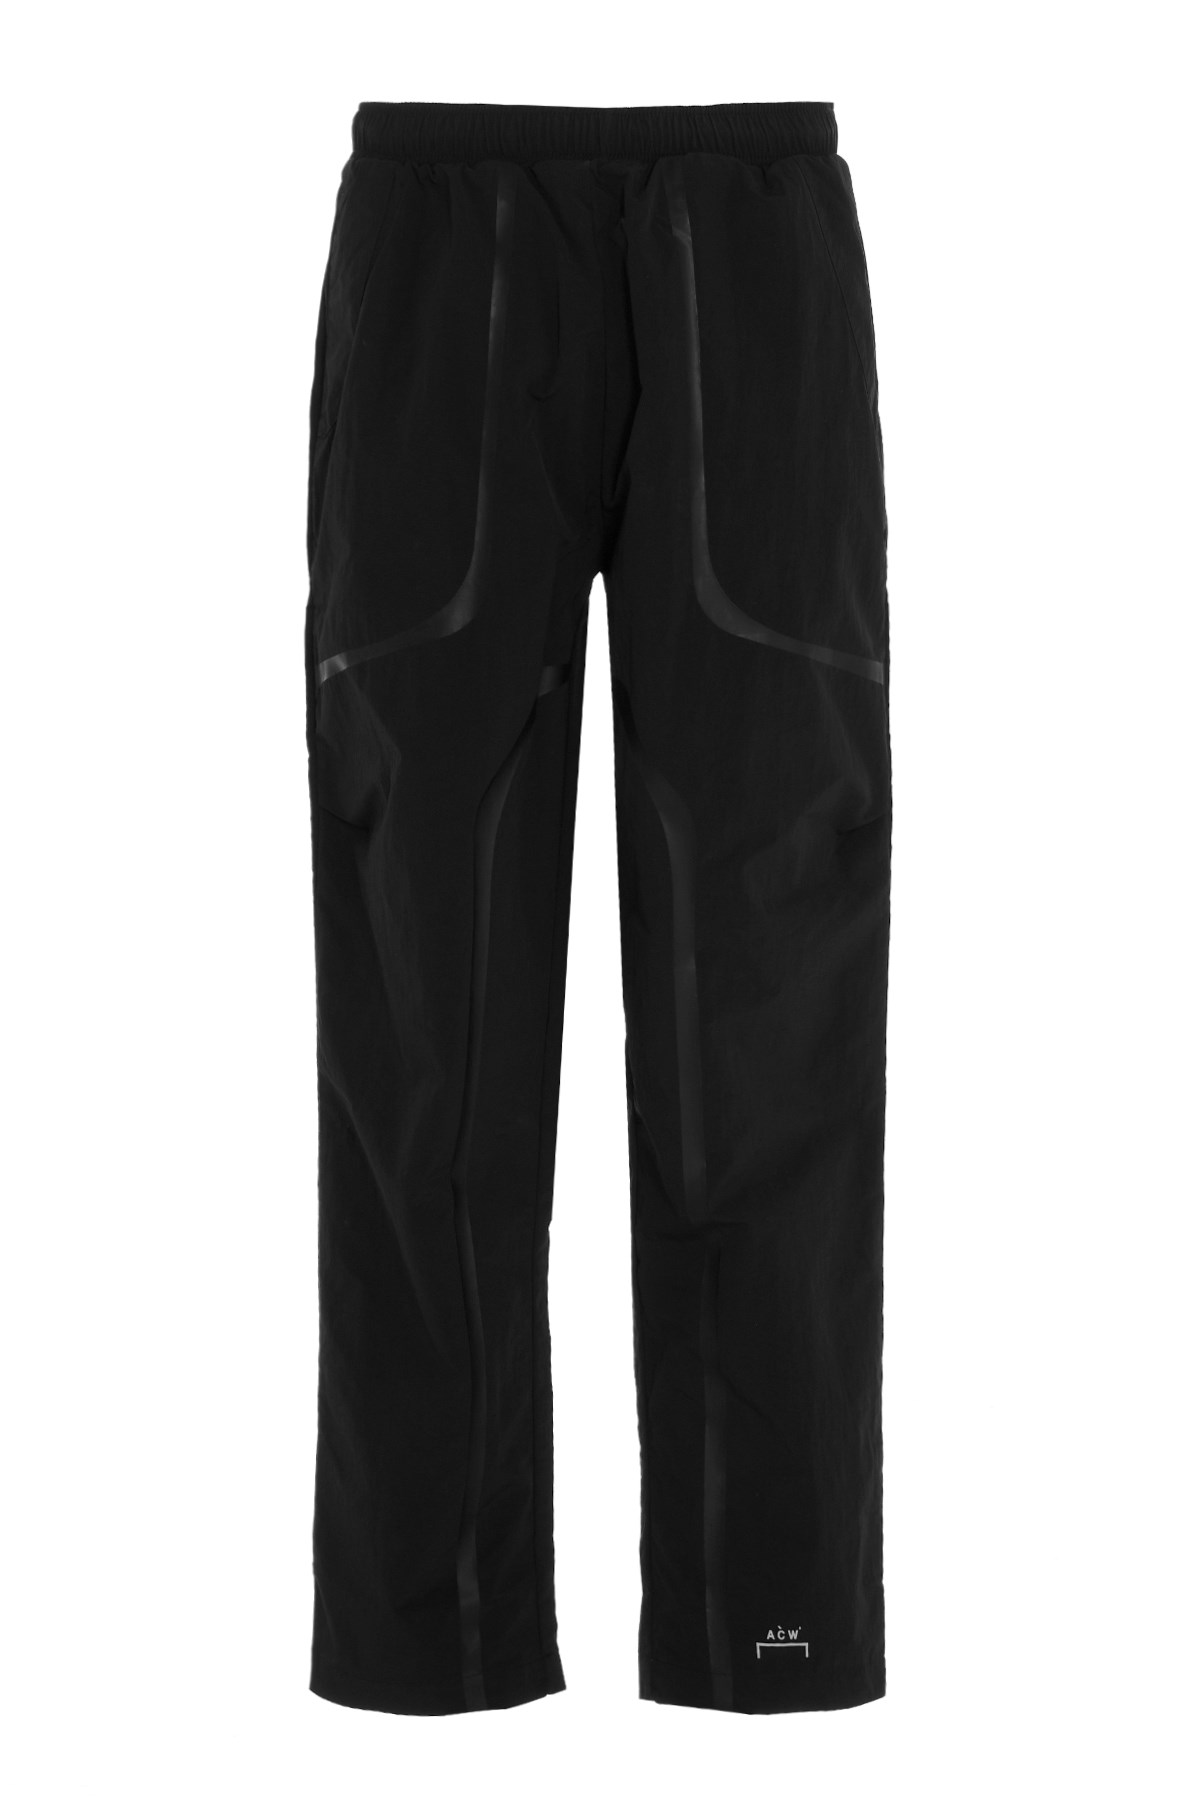 A-COLD-WALL* Nylon Pleated Trousers